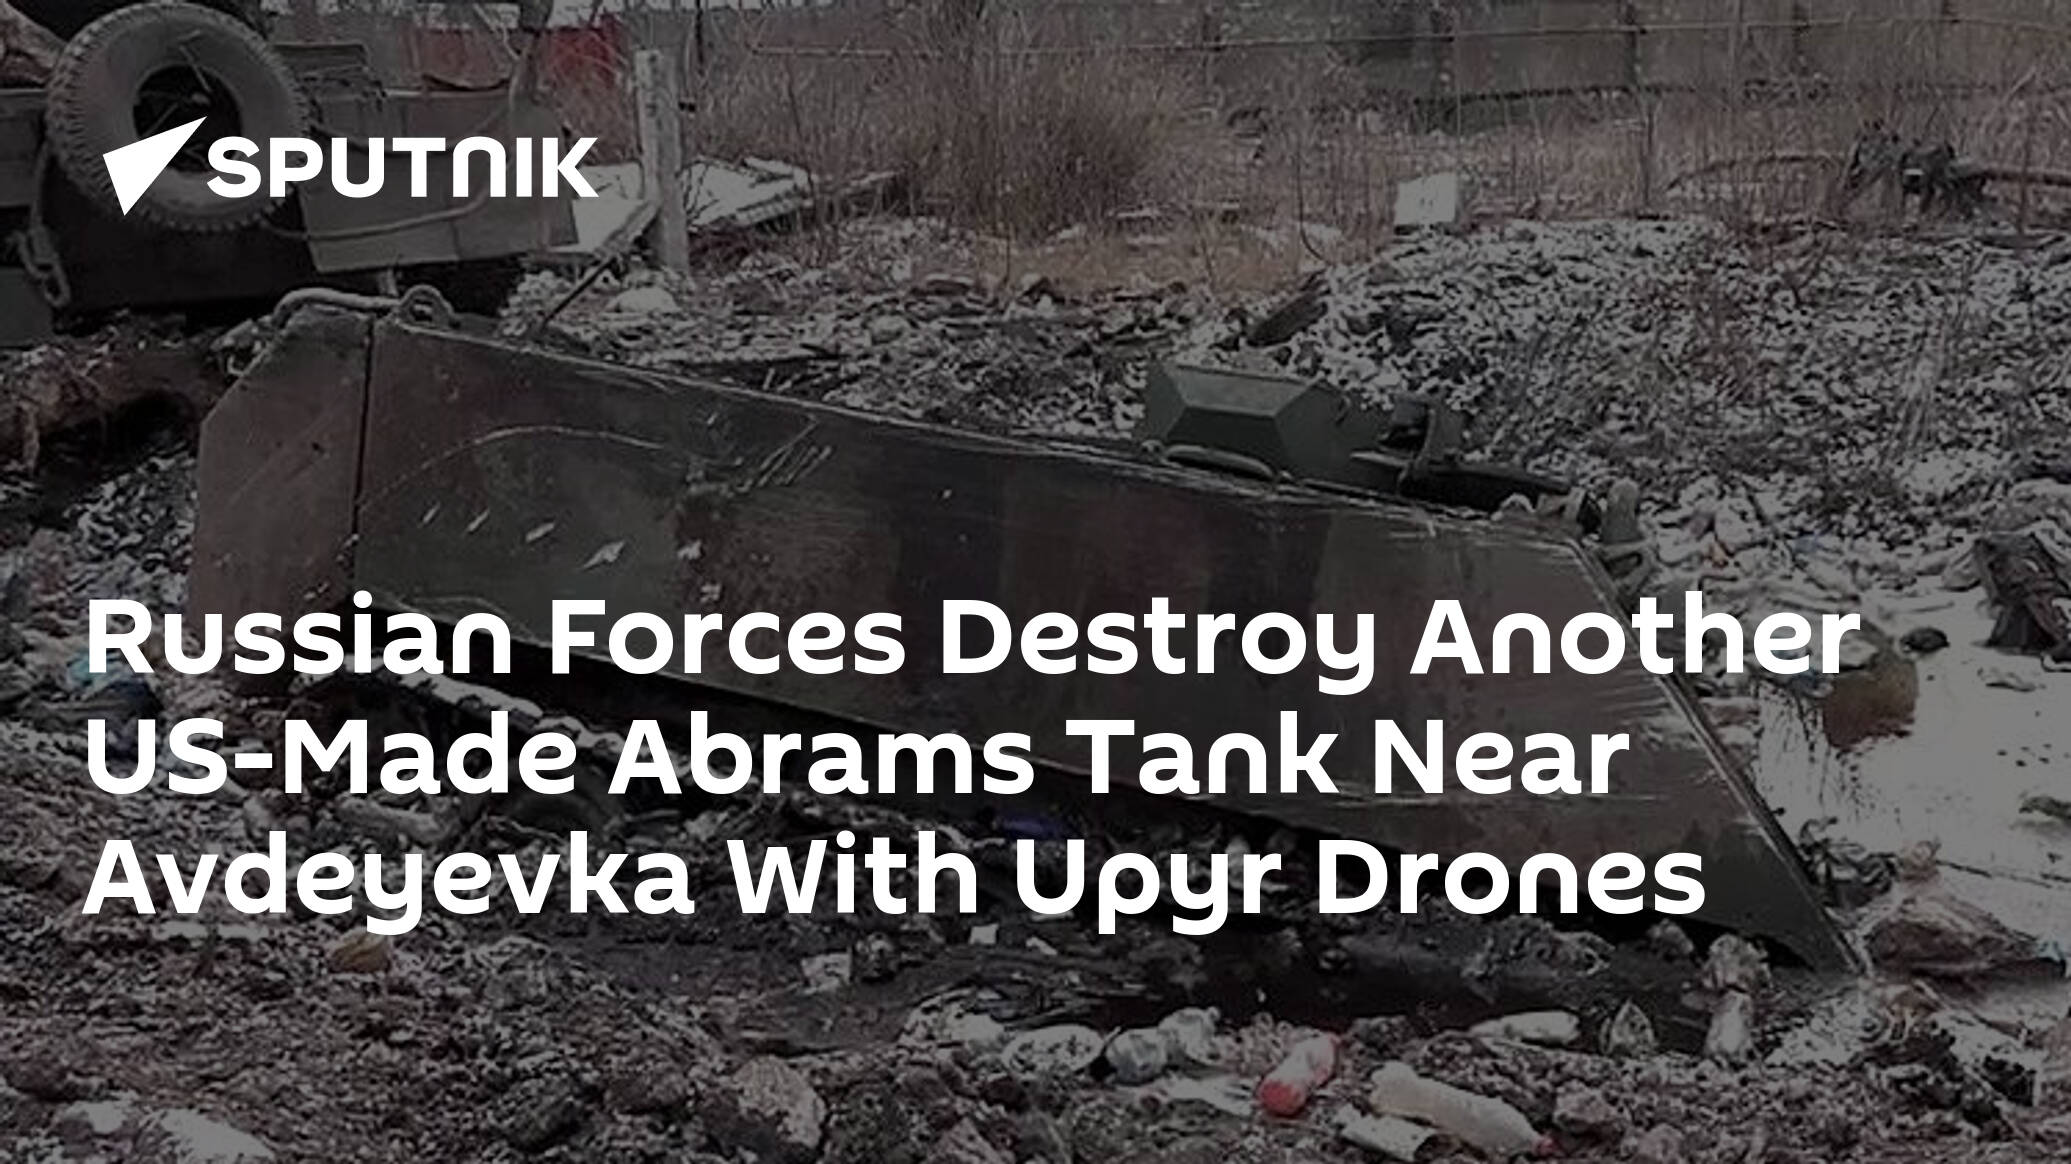 Russian Forces Destroy Another US-Made Abrams Tank Near Avdeyevka With Upyr Drones